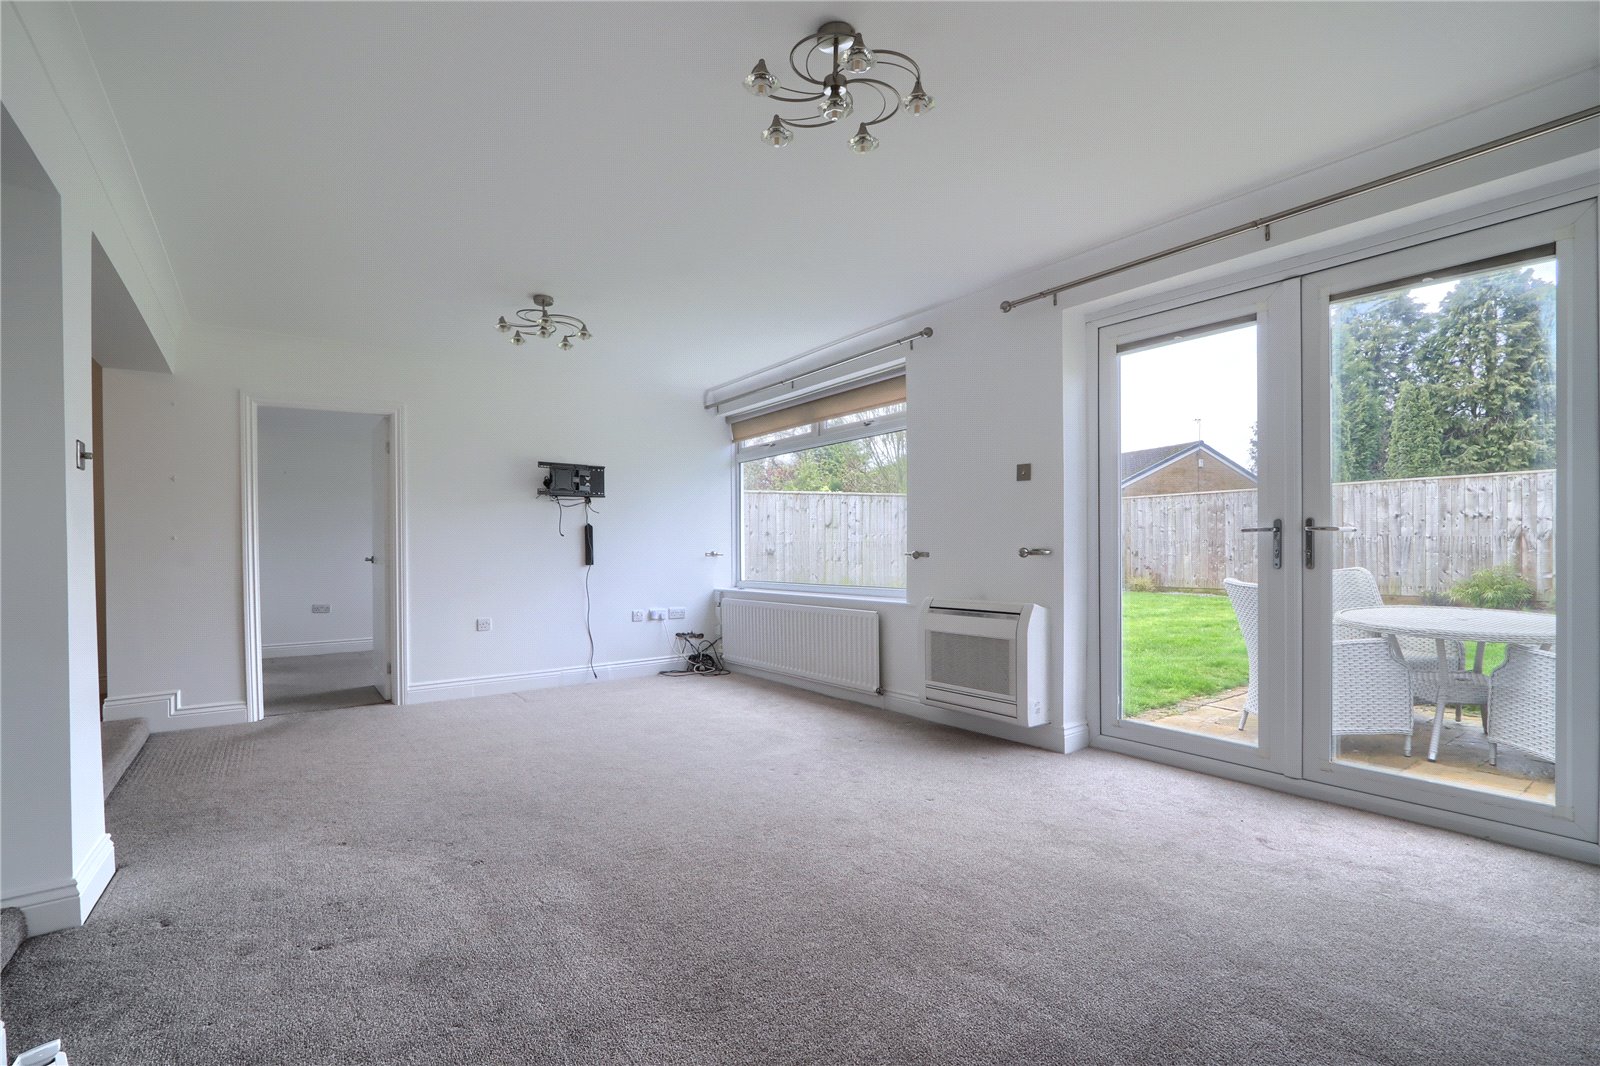 4 bed bungalow for sale in The Avenue, Fairfield 1